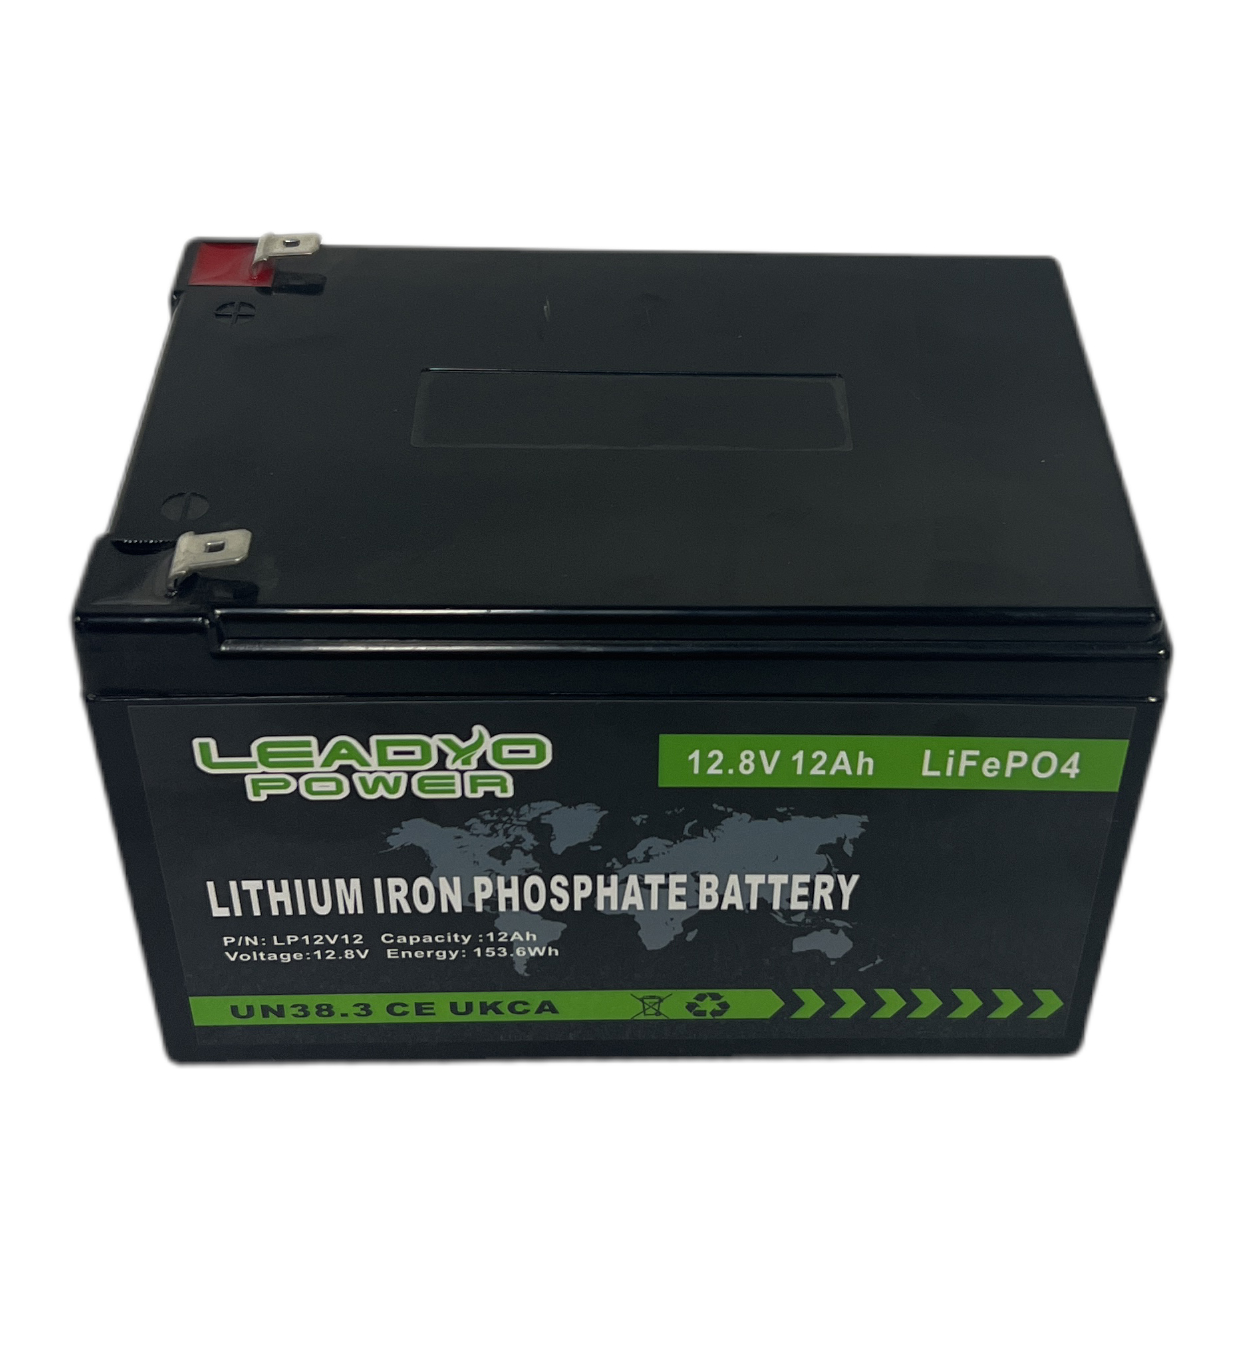 Leadyo Power's High-Performance LiFePO4 Battery Solutions for Diverse Industries